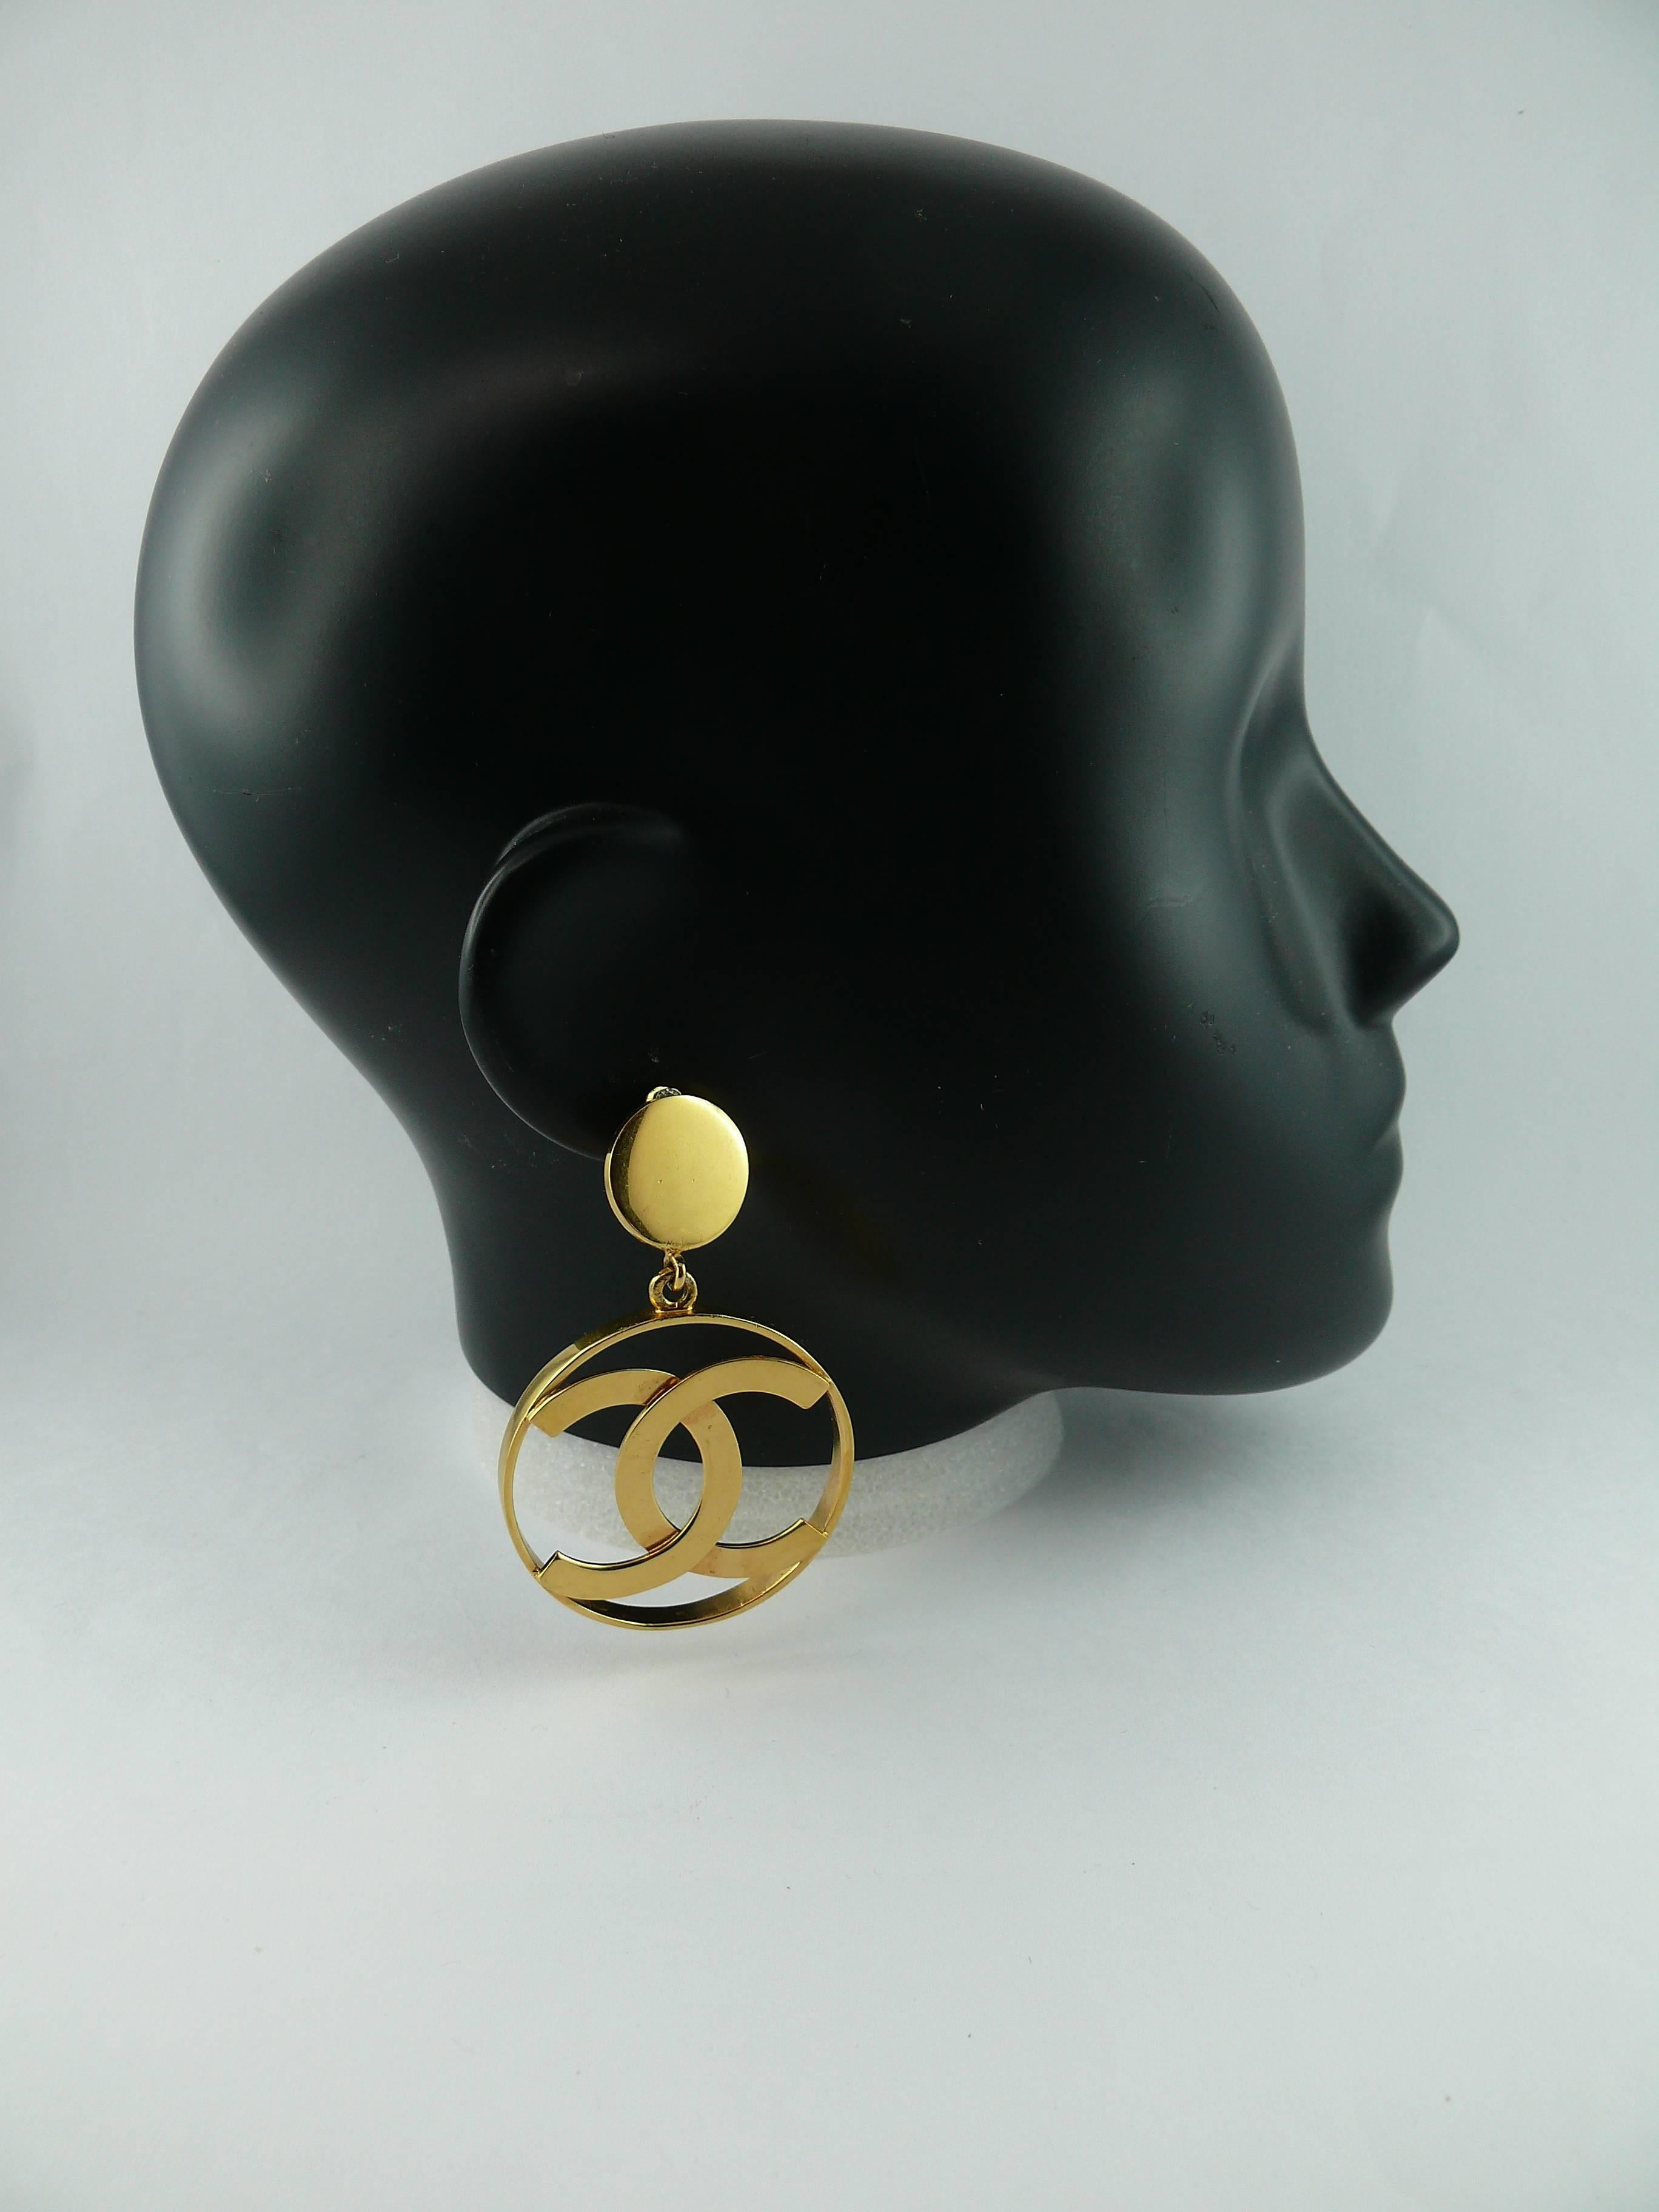 CHANEL vintage iconic massive CC logo gold tone hoop earrings (clip-on).

Embossed CHANEL.

Comes with original box.

JEWELRY CONDITION CHART
- New or never worn : item is in pristine condition with no noticeable imperfections
- Excellent :